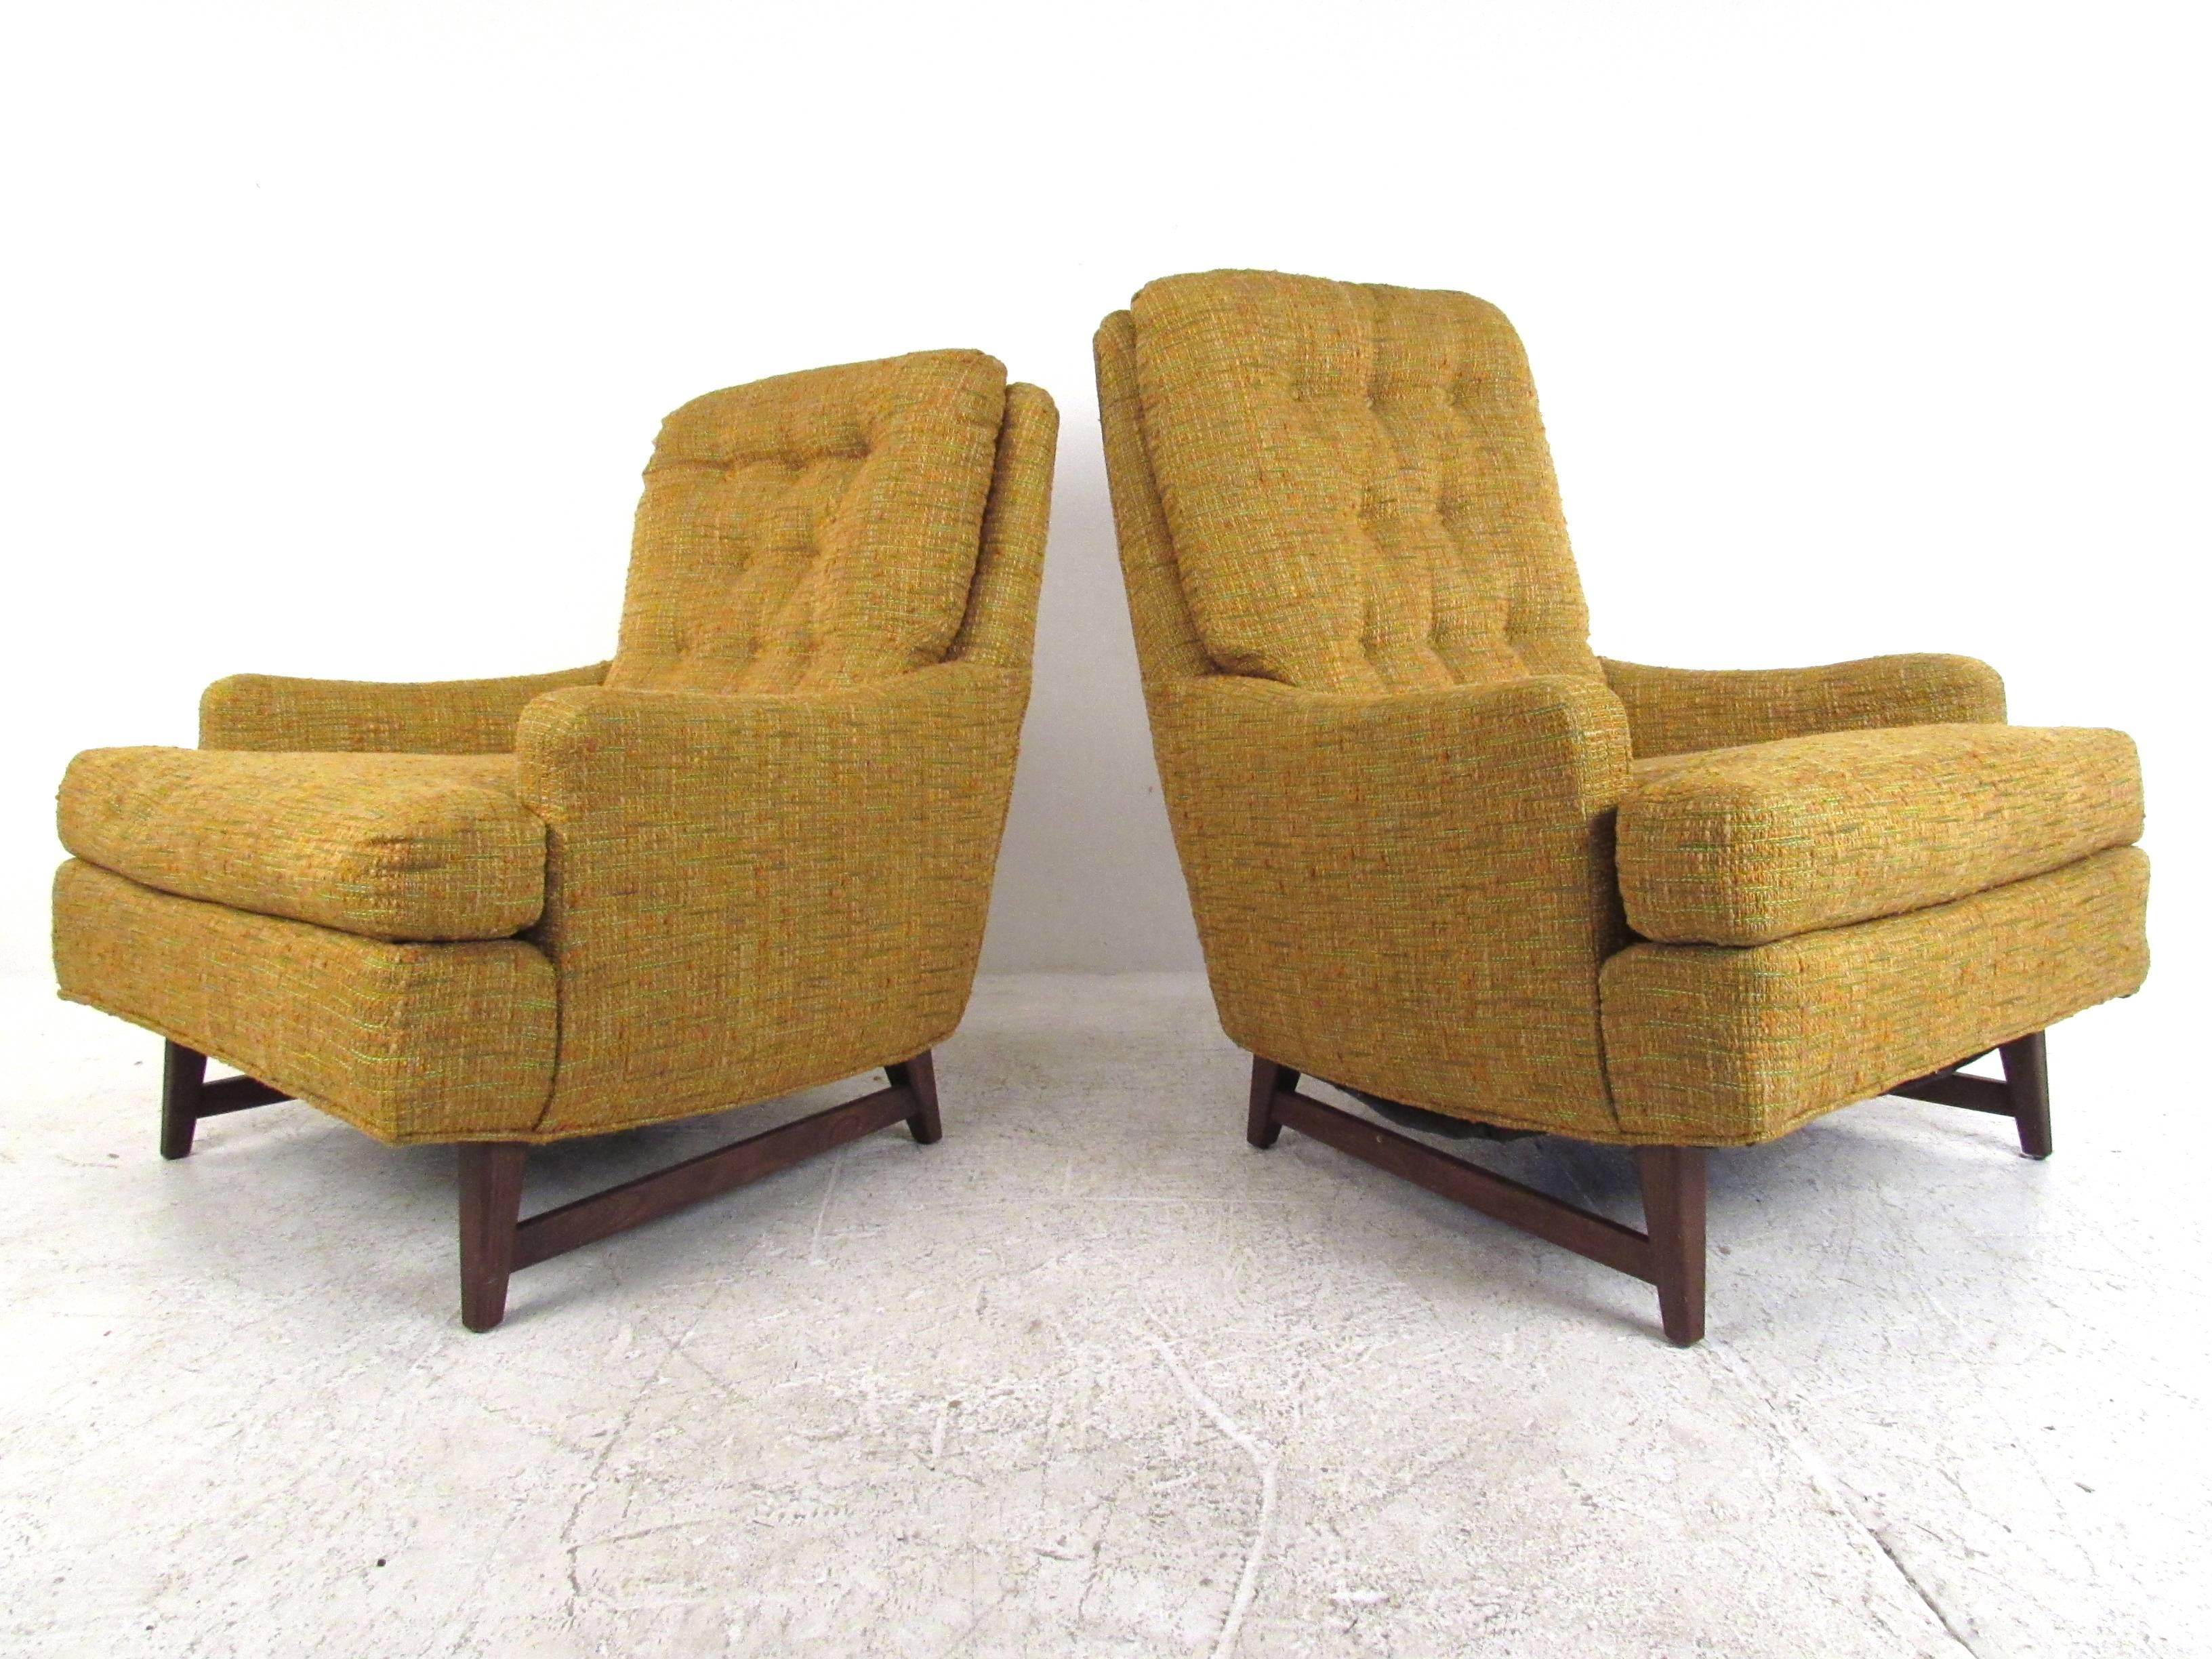 American Mid-Century Modern Selig Lounge Chair (single Tall chair only)